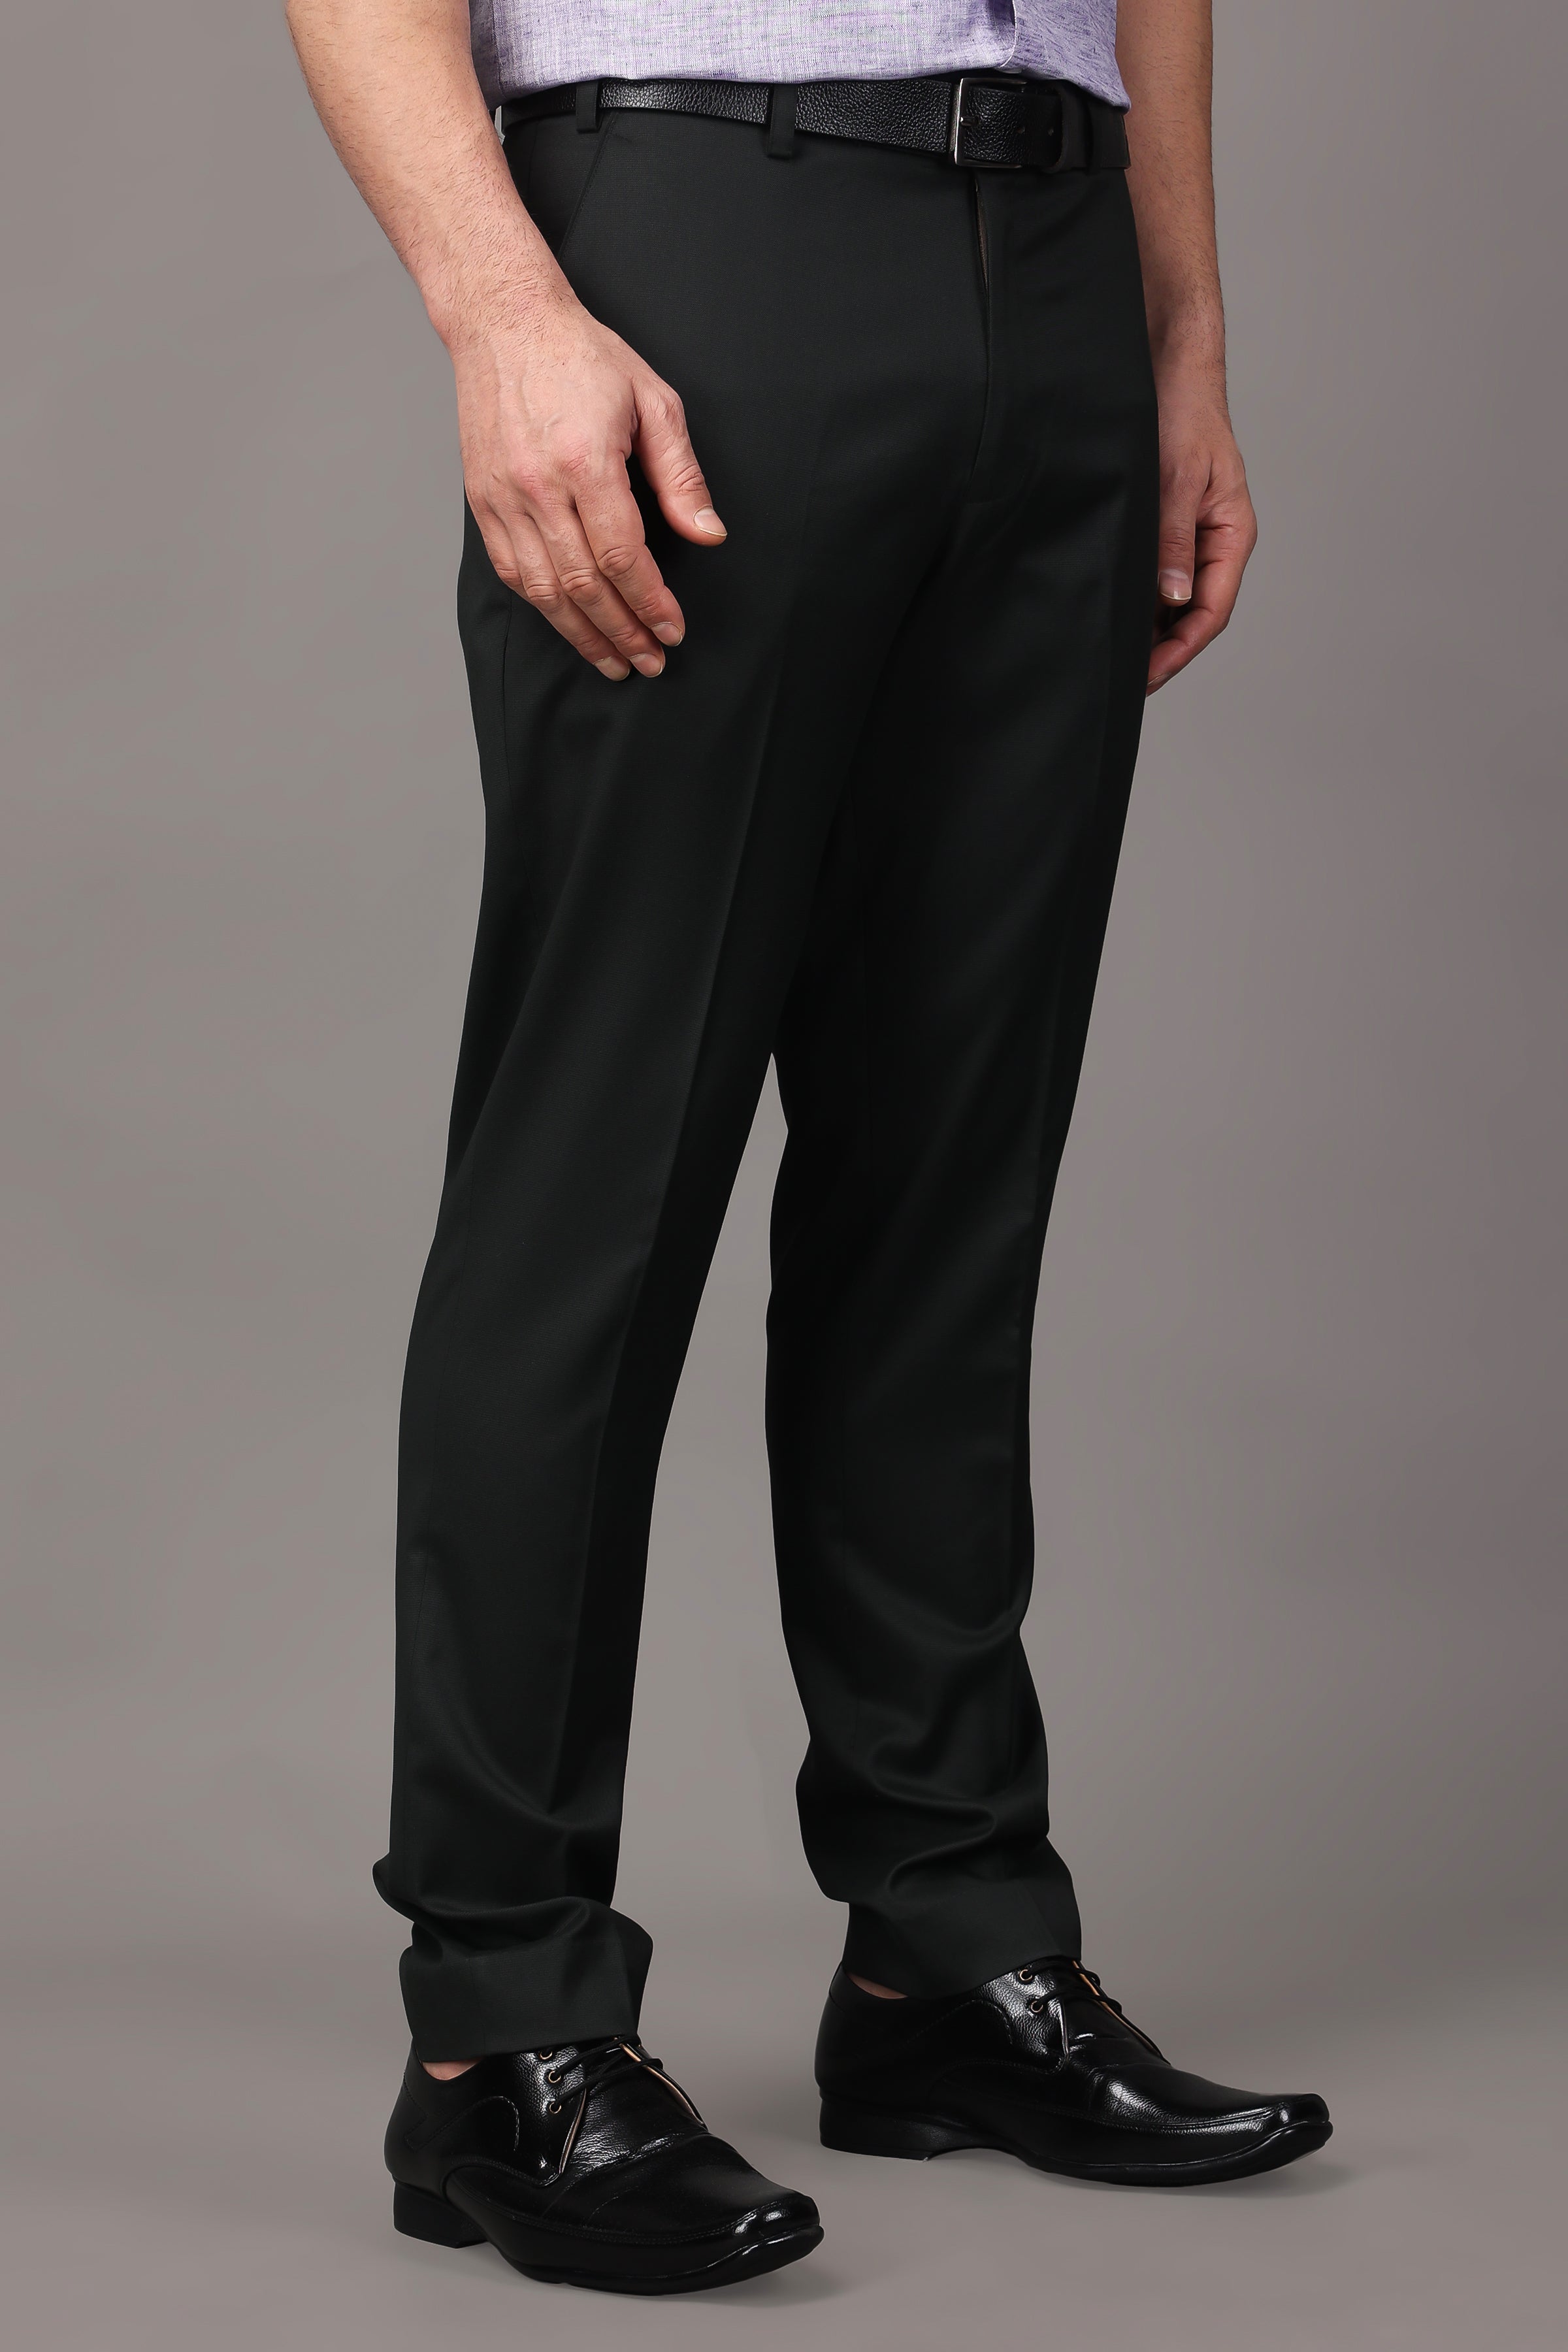 Buy CLITHS Slim Fit Flat Front Black Formal Pant for Men/Trousers for Men  Office Wear at Amazon.in